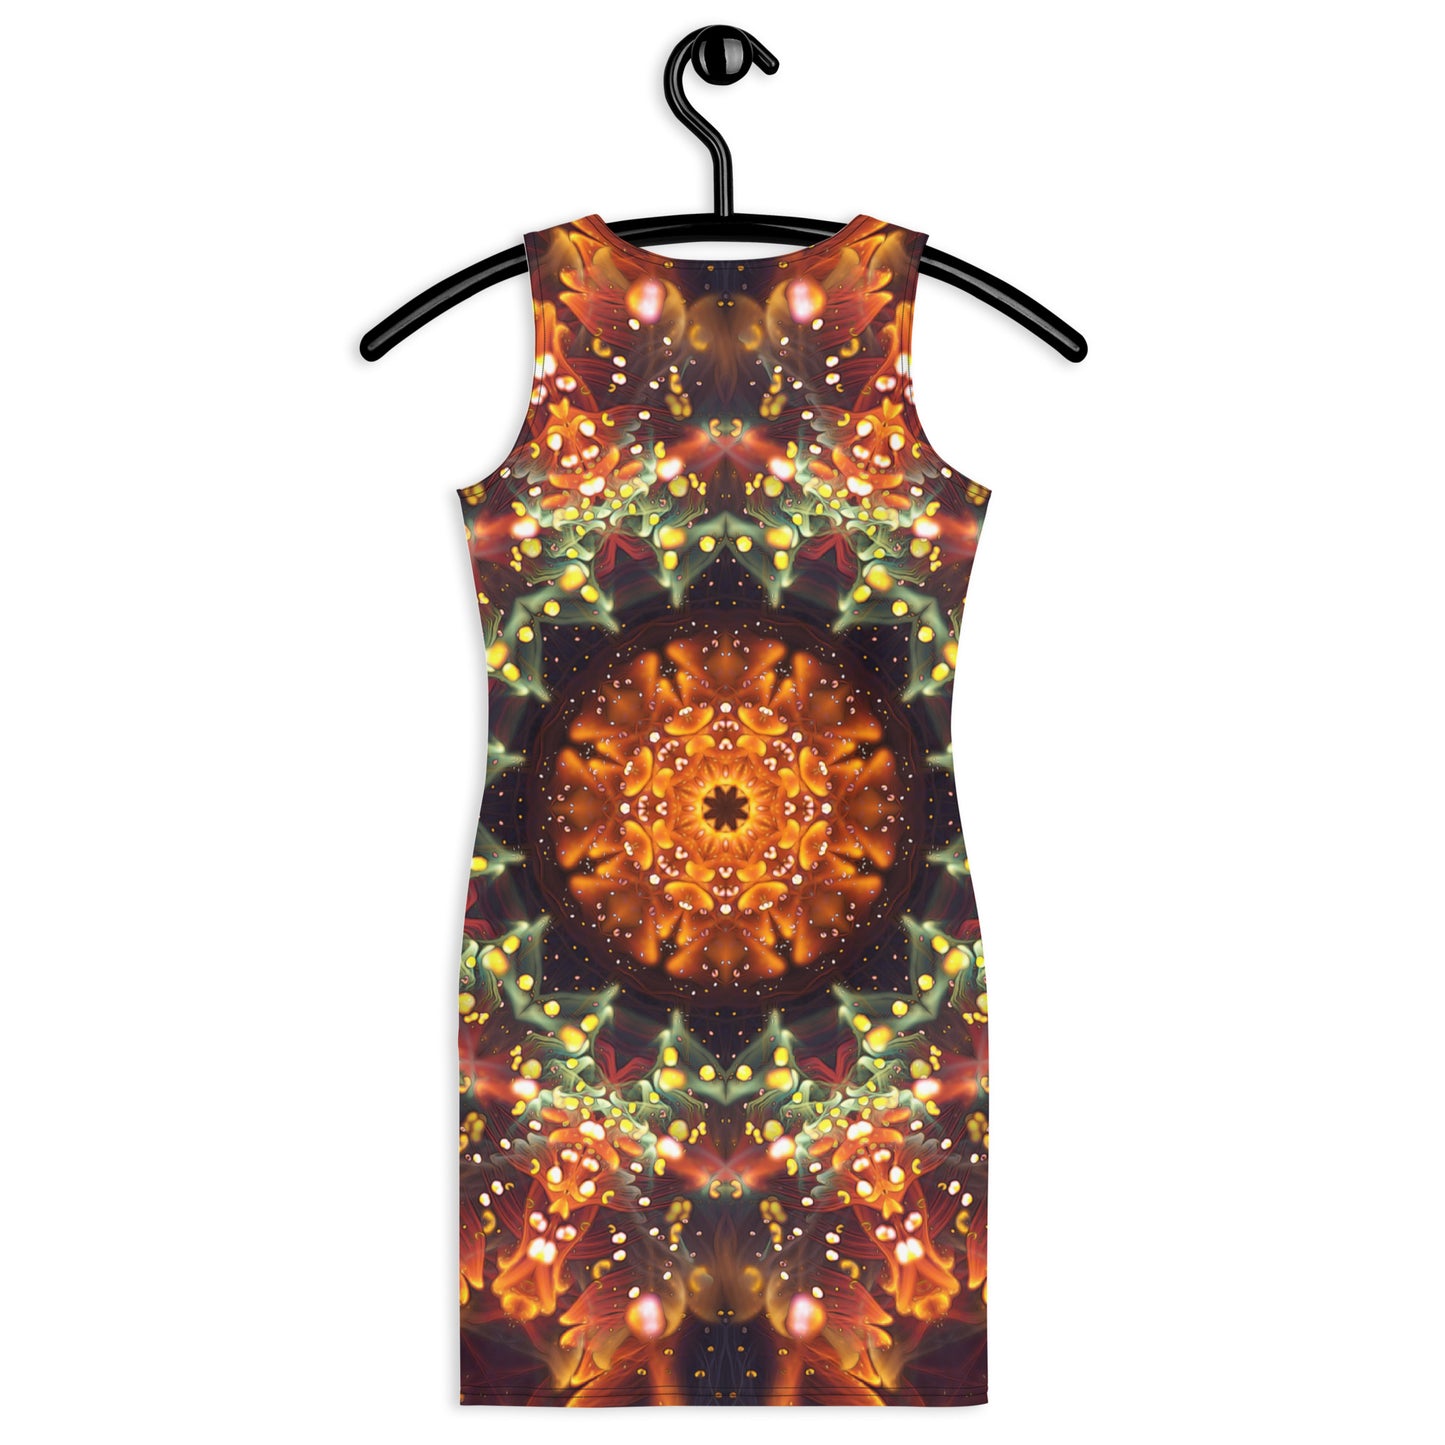 "Autumn Bloom" Bodycon FITTED DRESS